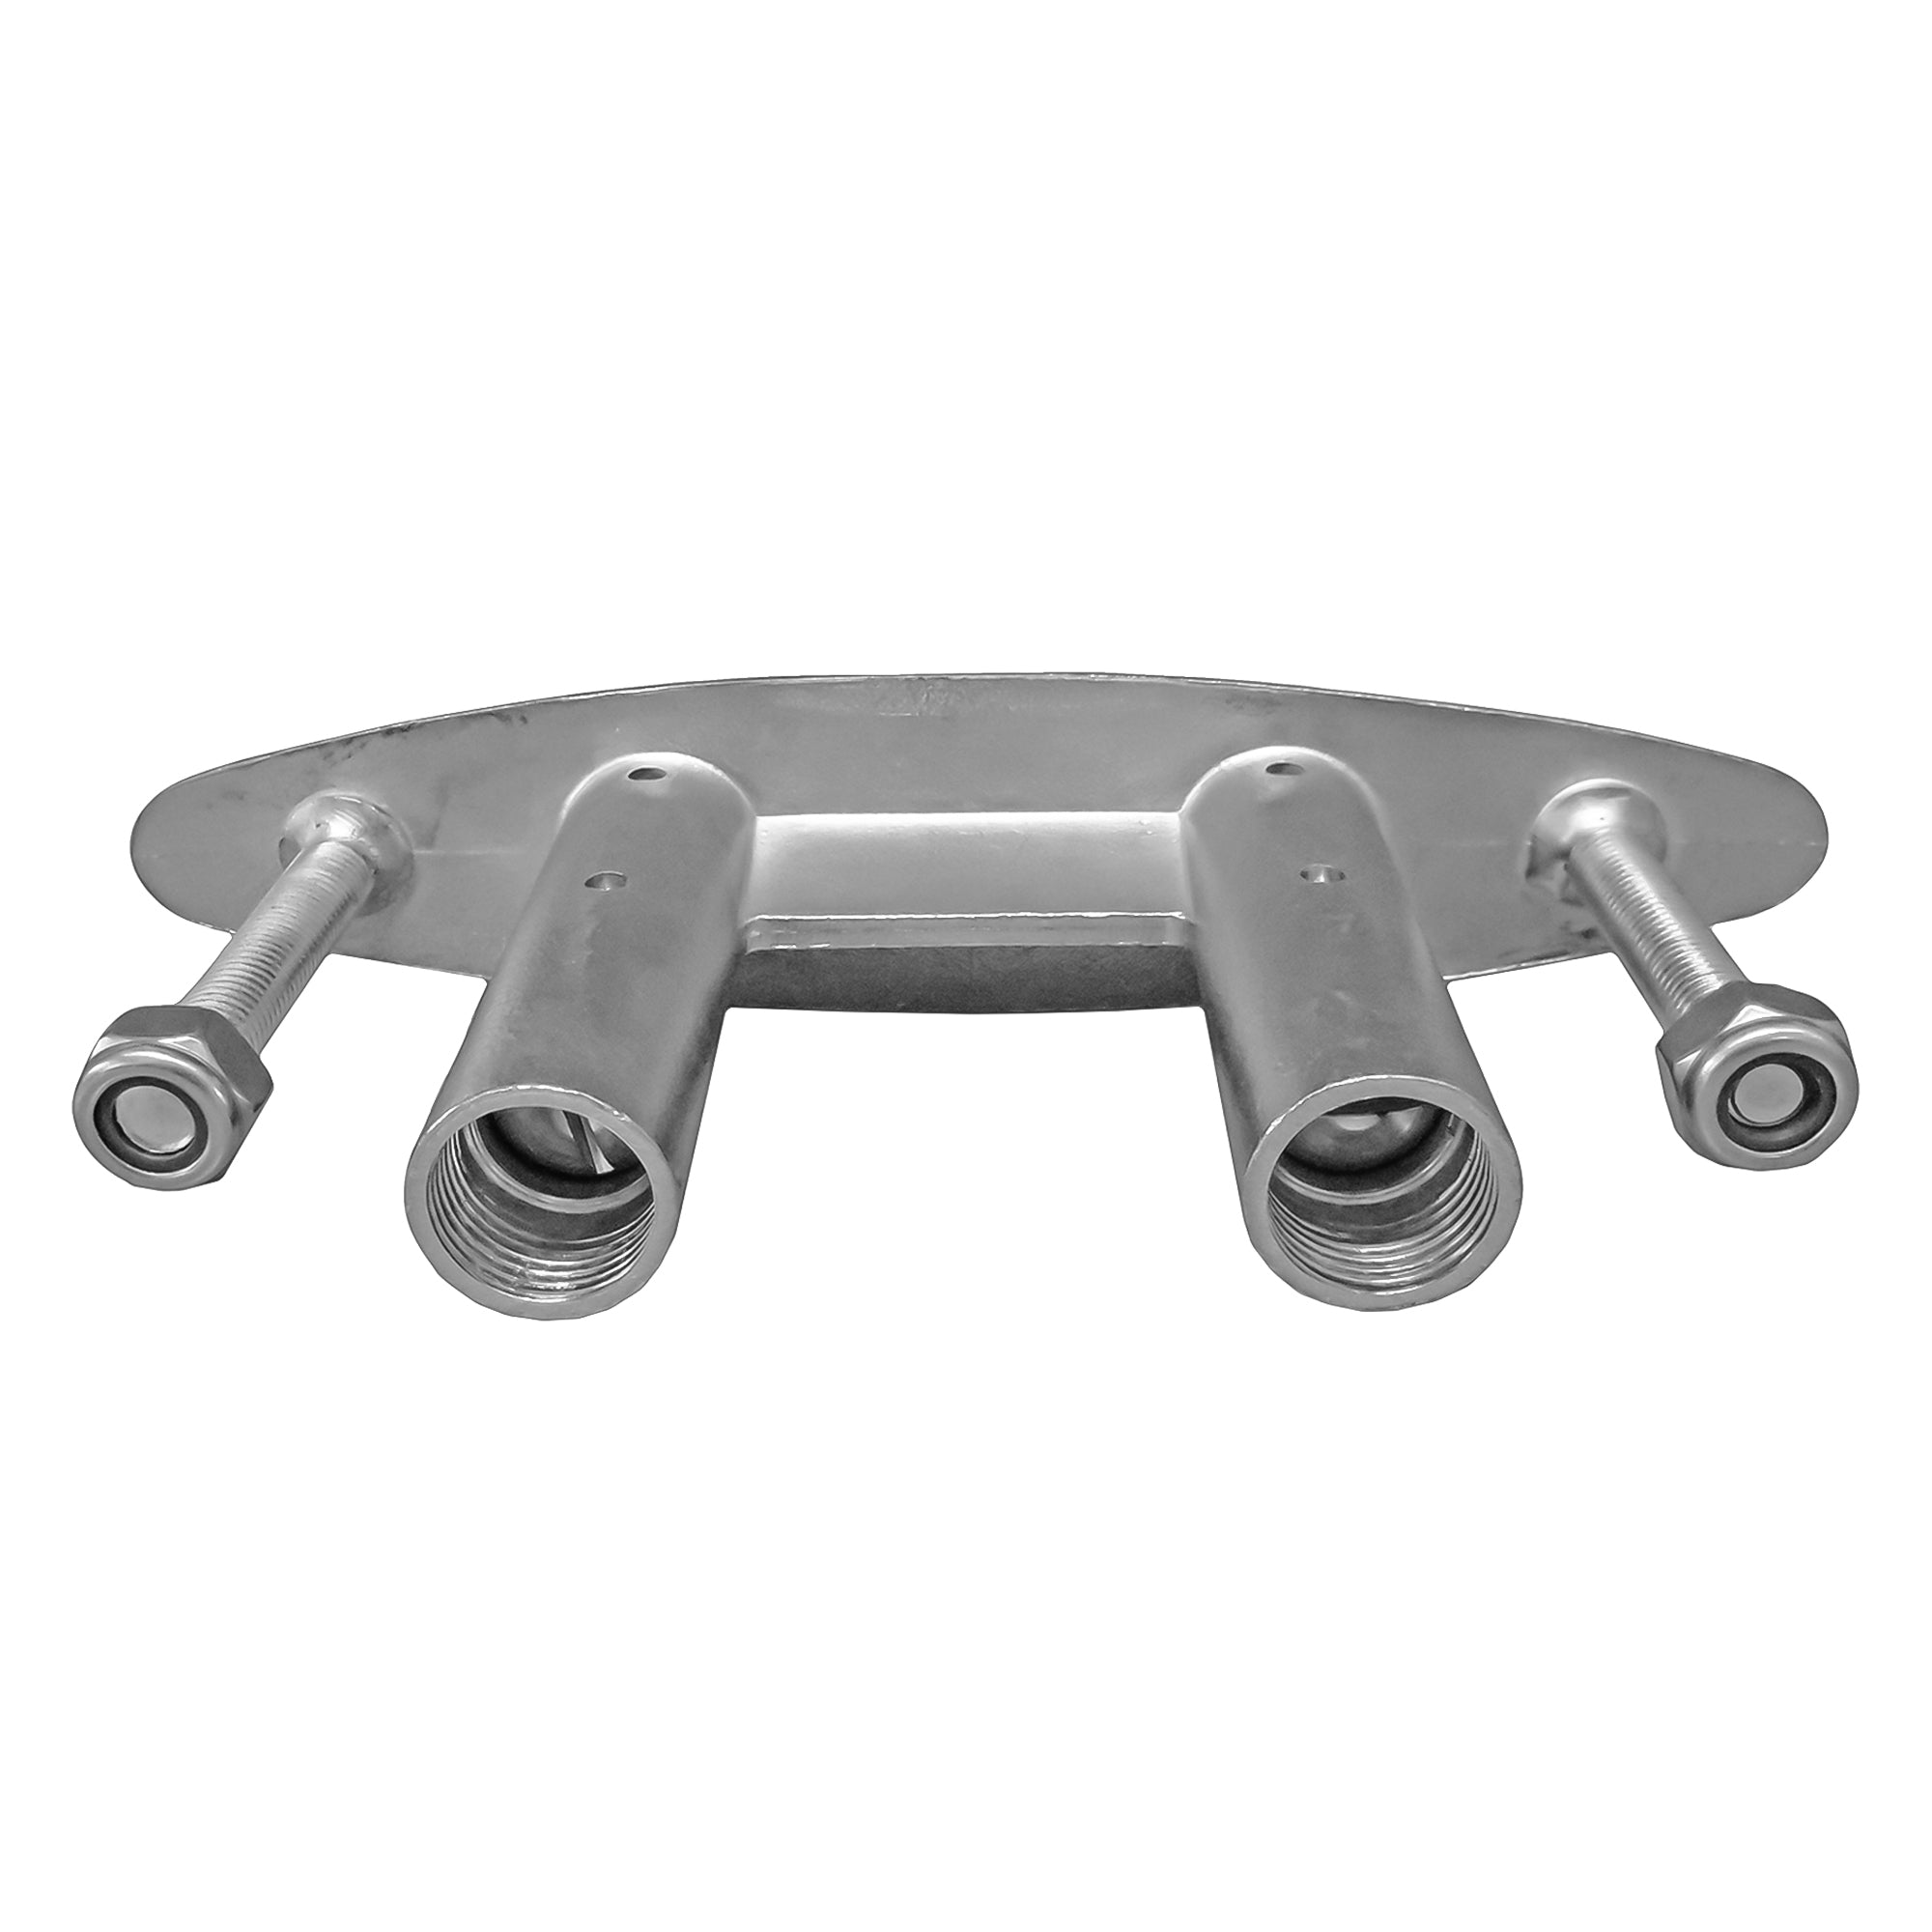 E-Z Push-Up Cleat, Stainless Steel, 6" - FO1771